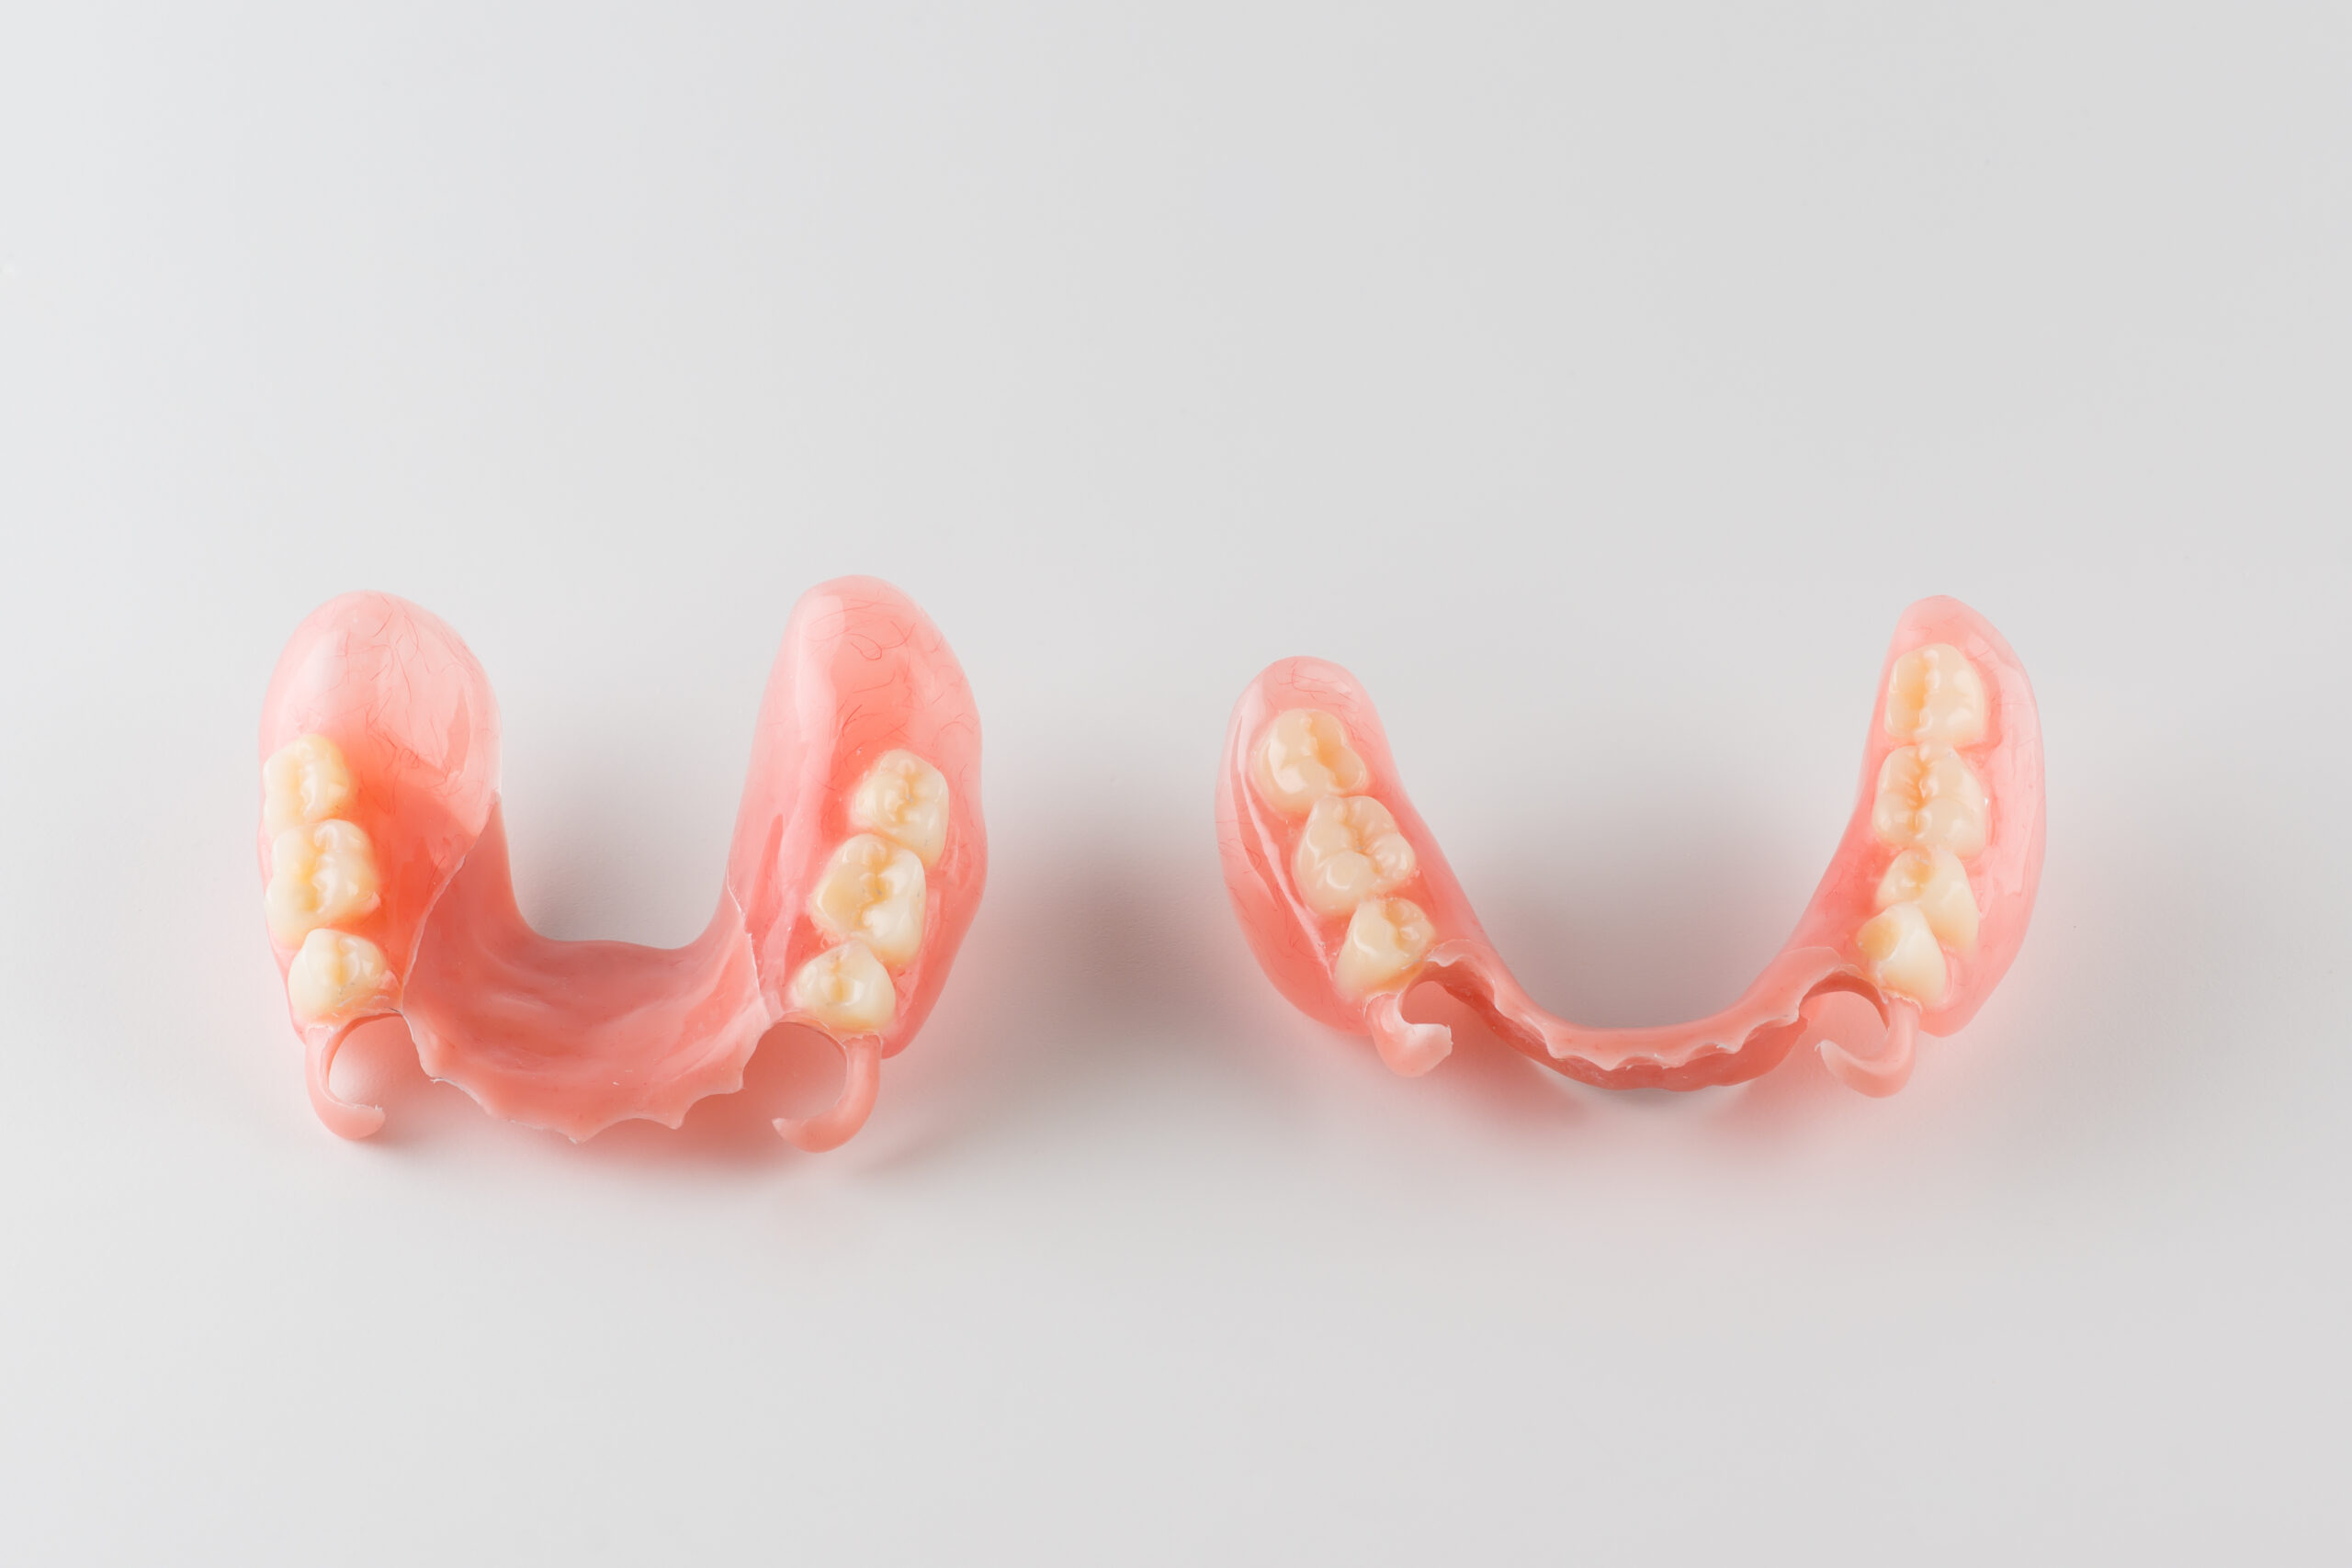 large image of a modern denture on a white background